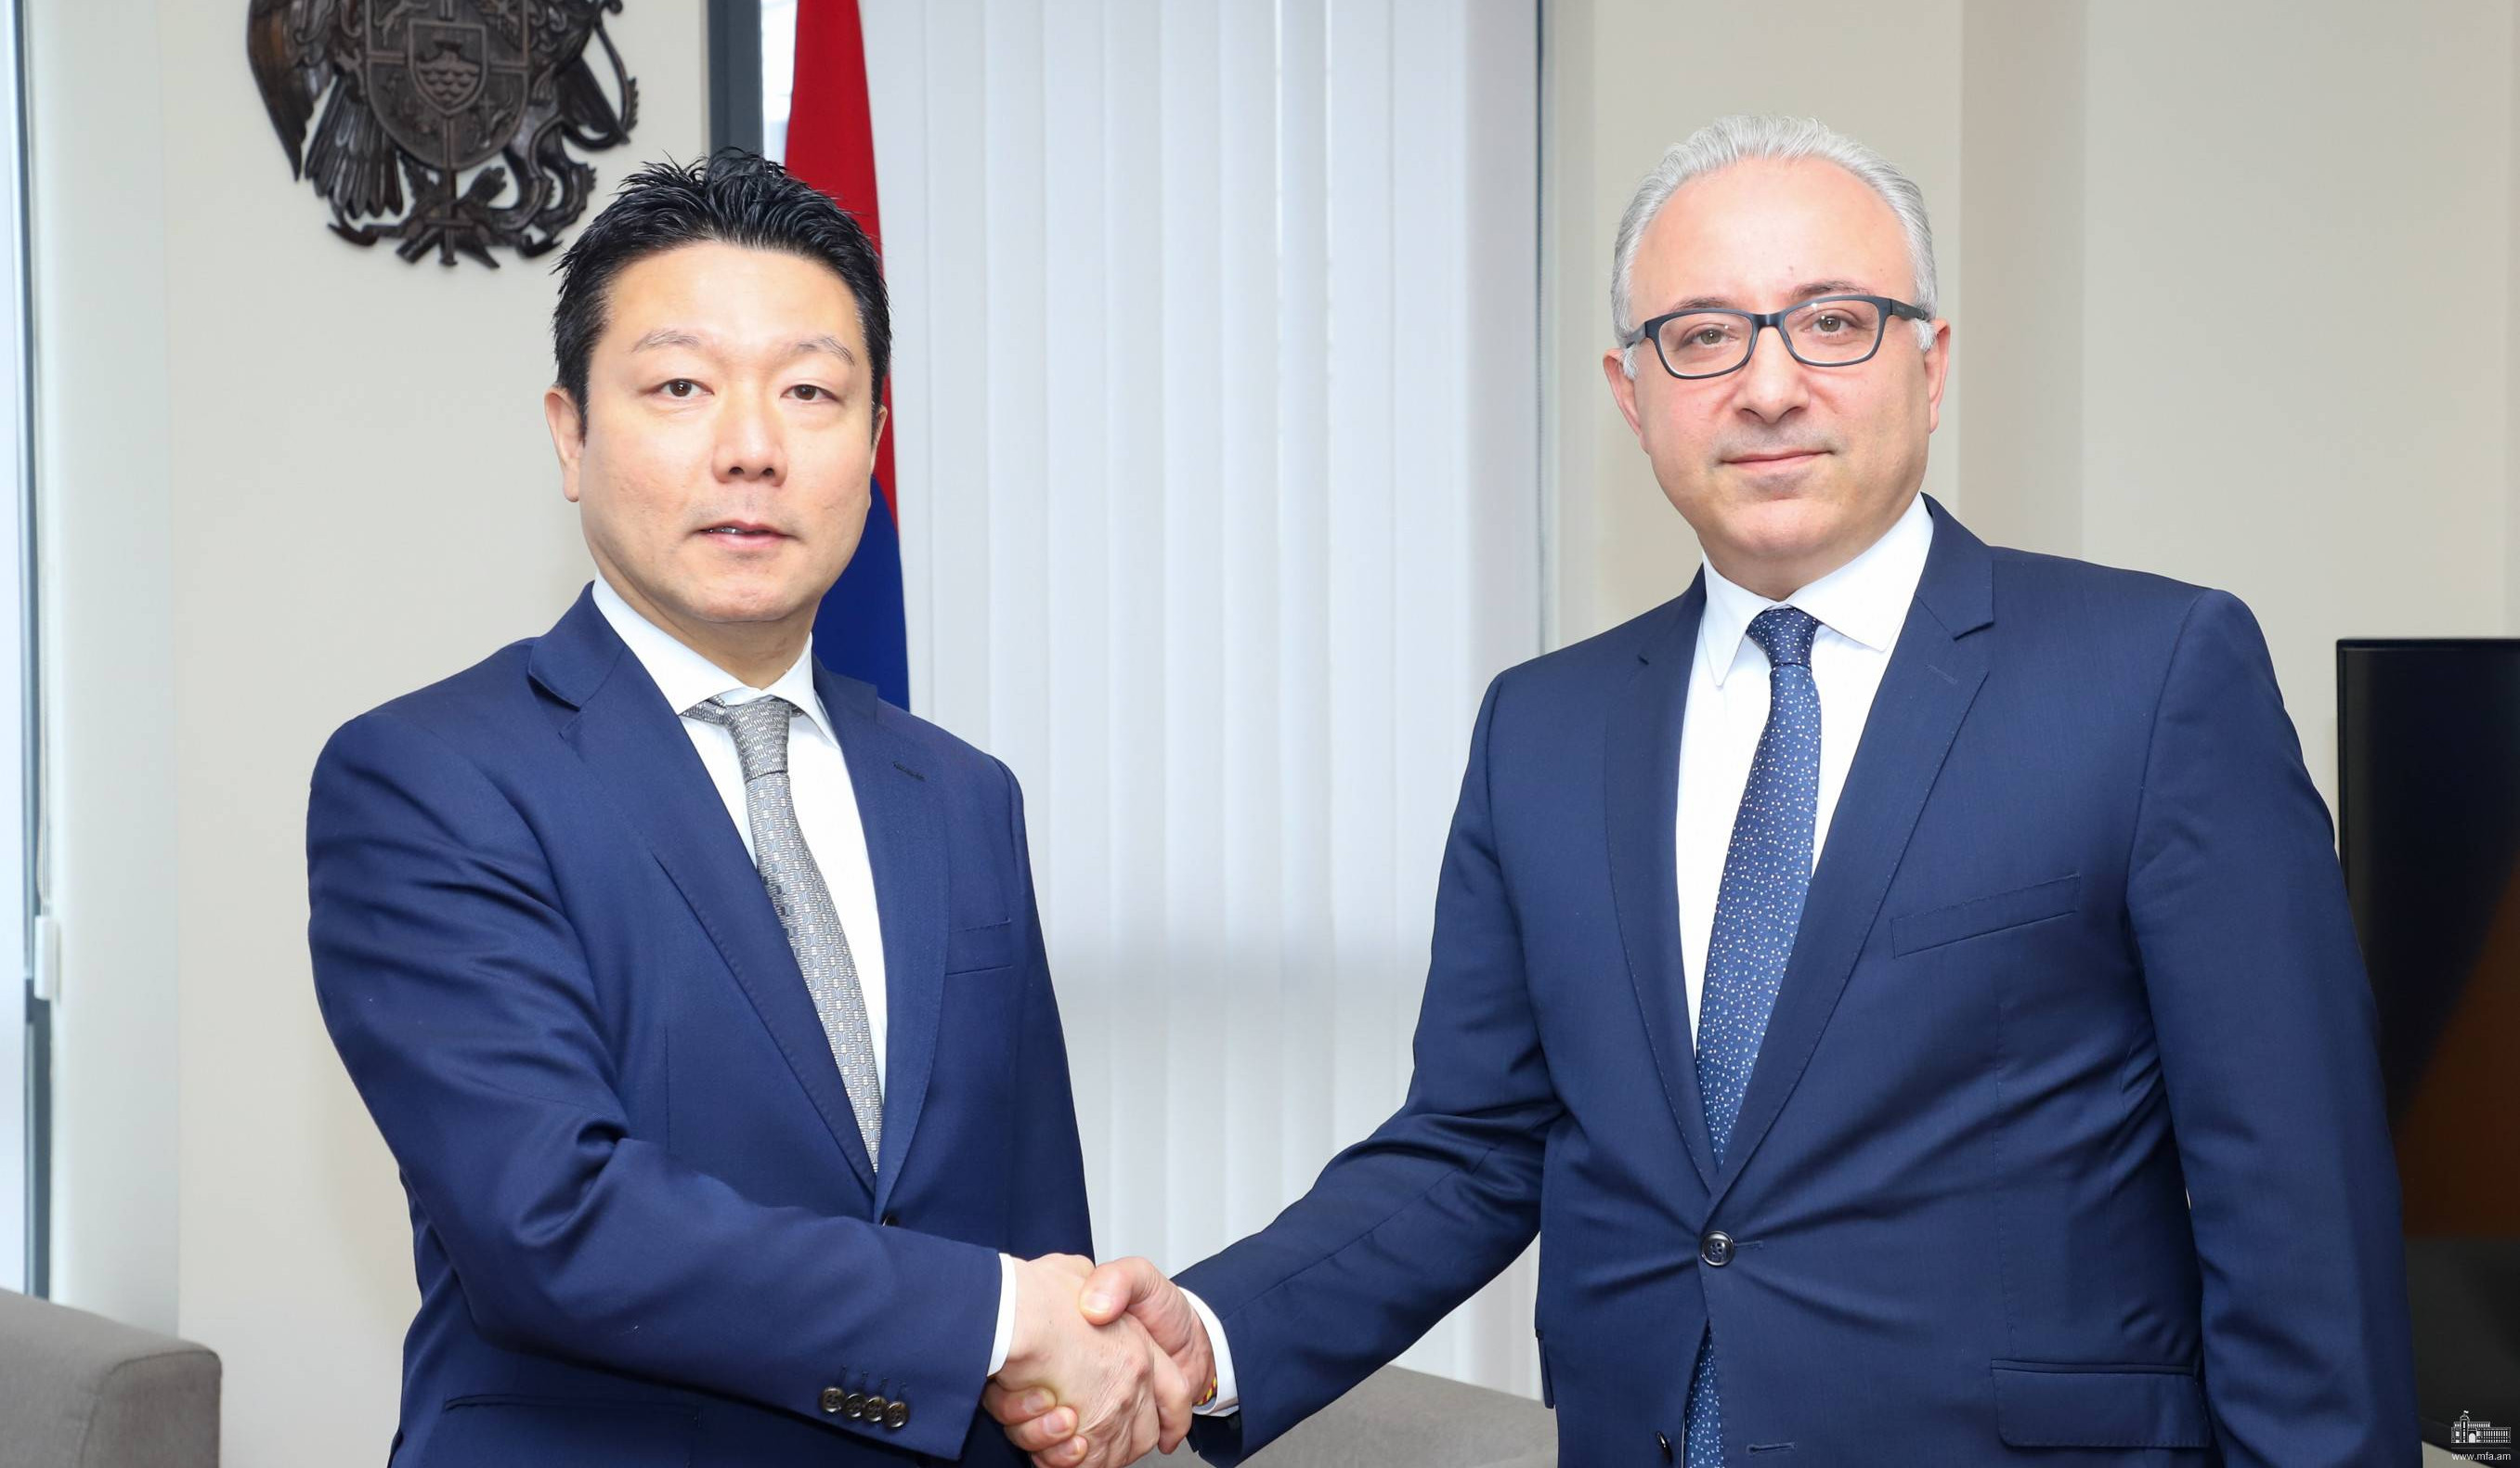 Meeting of Deputy Foreign Minister of photo